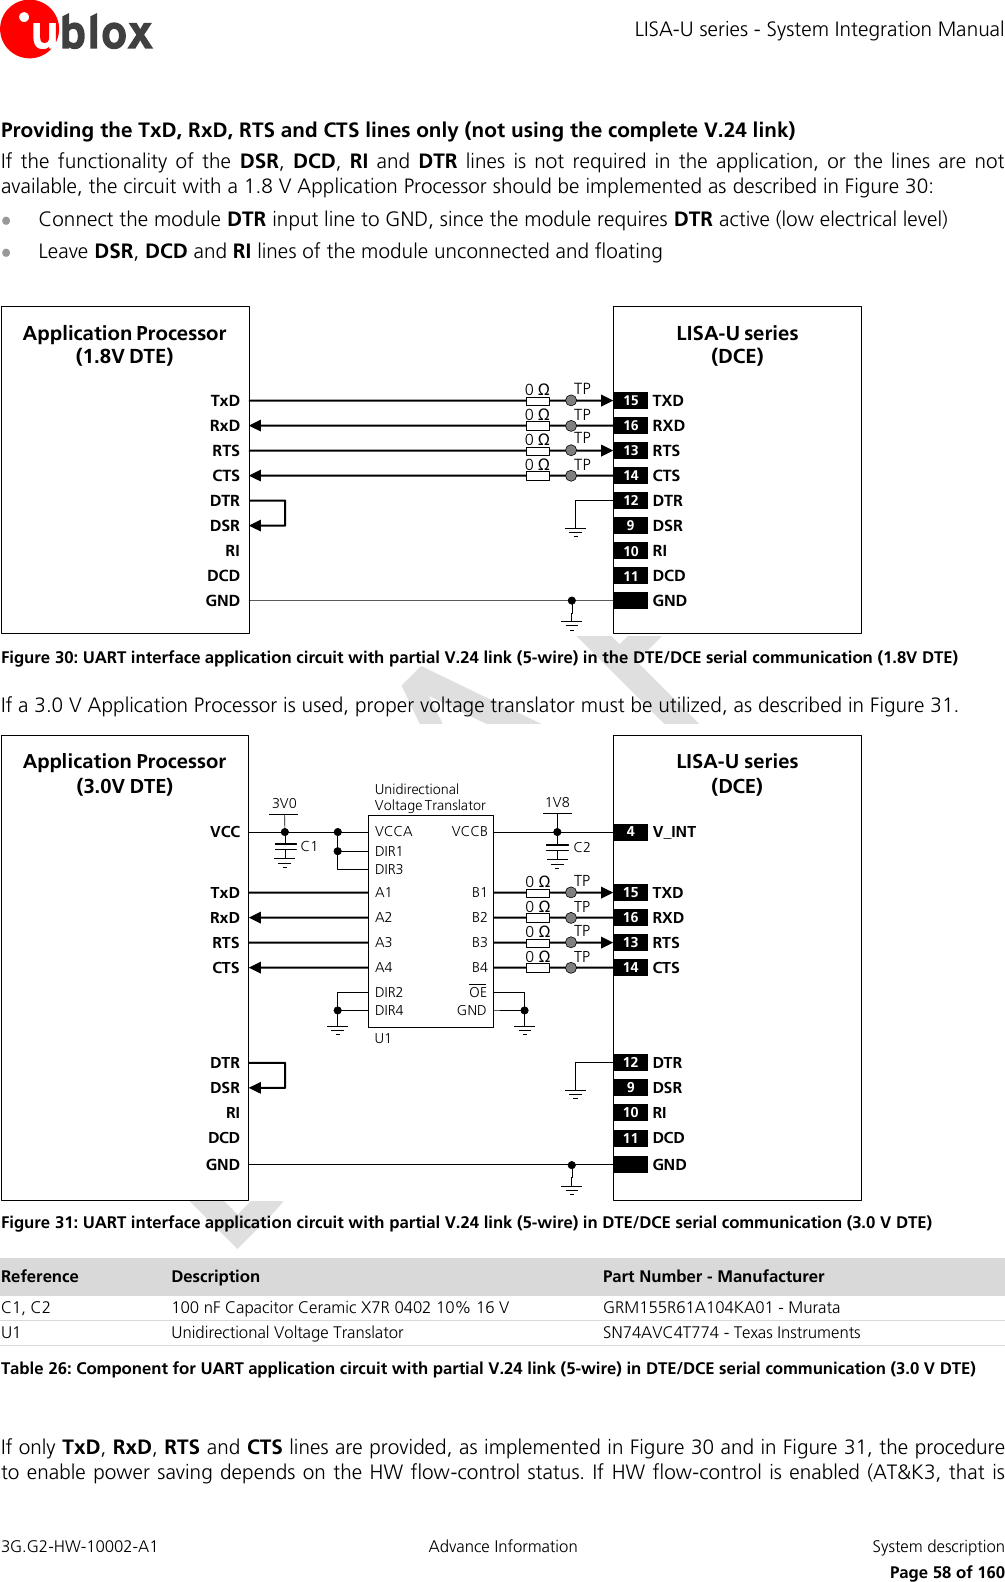 LISA-U series - System Integration Manual 3G.G2-HW-10002-A1  Advance Information  System description      Page 58 of 160 Providing the TxD, RxD, RTS and CTS lines only (not using the complete V.24 link) If the  functionality of  the  DSR, DCD,  RI and DTR  lines is not  required in the  application, or  the lines are  not available, the circuit with a 1.8 V Application Processor should be implemented as described in Figure 30:  Connect the module DTR input line to GND, since the module requires DTR active (low electrical level)  Leave DSR, DCD and RI lines of the module unconnected and floating  TxDApplication Processor(1.8V DTE)RxDRTSCTSDTRDSRRIDCDGNDLISA-U series (DCE)15 TXD12 DTR16 RXD13 RTS14 CTS9DSR10 RI11 DCDGND0 Ω0 ΩTPTP0 Ω0 ΩTPTP Figure 30: UART interface application circuit with partial V.24 link (5-wire) in the DTE/DCE serial communication (1.8V DTE) If a 3.0 V Application Processor is used, proper voltage translator must be utilized, as described in Figure 31. 4V_INTTxDApplication Processor(3.0V DTE)RxDRTSCTSDTRDSRRIDCDGNDLISA-U series (DCE)15 TXD12 DTR16 RXD13 RTS14 CTS9DSR10 RI11 DCDGND0 Ω0 ΩTPTP0 Ω0 ΩTPTP1V8B1 A1GNDU1B3A3VCCBVCCAUnidirectionalVoltage TranslatorC1 C23V0DIR3DIR2 OEDIR1VCCB2 A2B4A4DIR4 Figure 31: UART interface application circuit with partial V.24 link (5-wire) in DTE/DCE serial communication (3.0 V DTE) Reference Description Part Number - Manufacturer C1, C2 100 nF Capacitor Ceramic X7R 0402 10% 16 V GRM155R61A104KA01 - Murata U1 Unidirectional Voltage Translator SN74AVC4T774 - Texas Instruments Table 26: Component for UART application circuit with partial V.24 link (5-wire) in DTE/DCE serial communication (3.0 V DTE)  If only TxD, RxD, RTS and CTS lines are provided, as implemented in Figure 30 and in Figure 31, the procedure to enable power saving depends on the HW flow-control status. If HW flow-control is enabled (AT&amp;K3, that is 